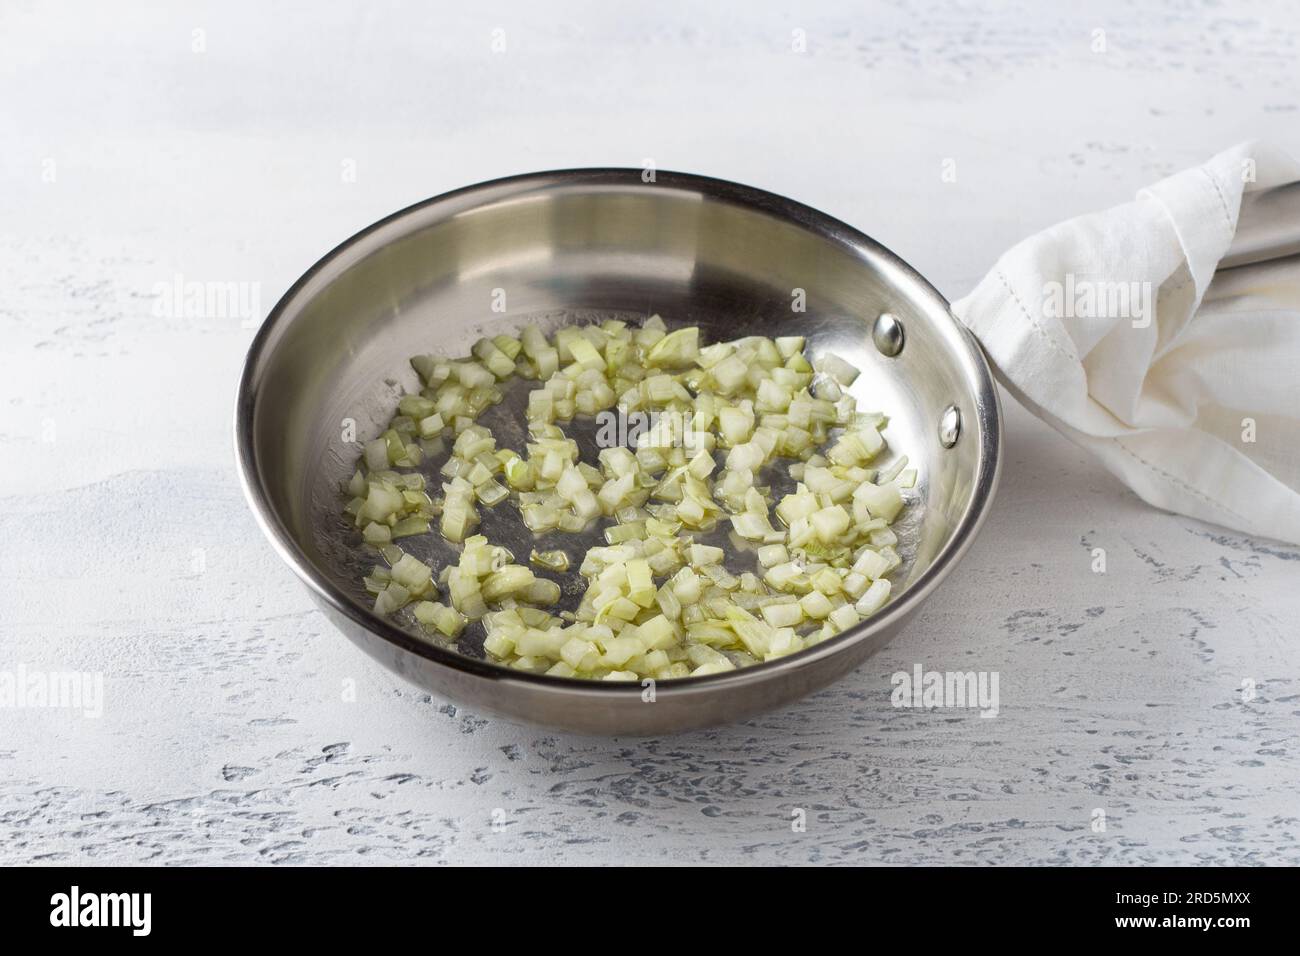 A frying pan with onions fried in butter on a light blue background. Cooking homemade risotto with pear and gorgonzola, step by step, step 2. Stock Photo